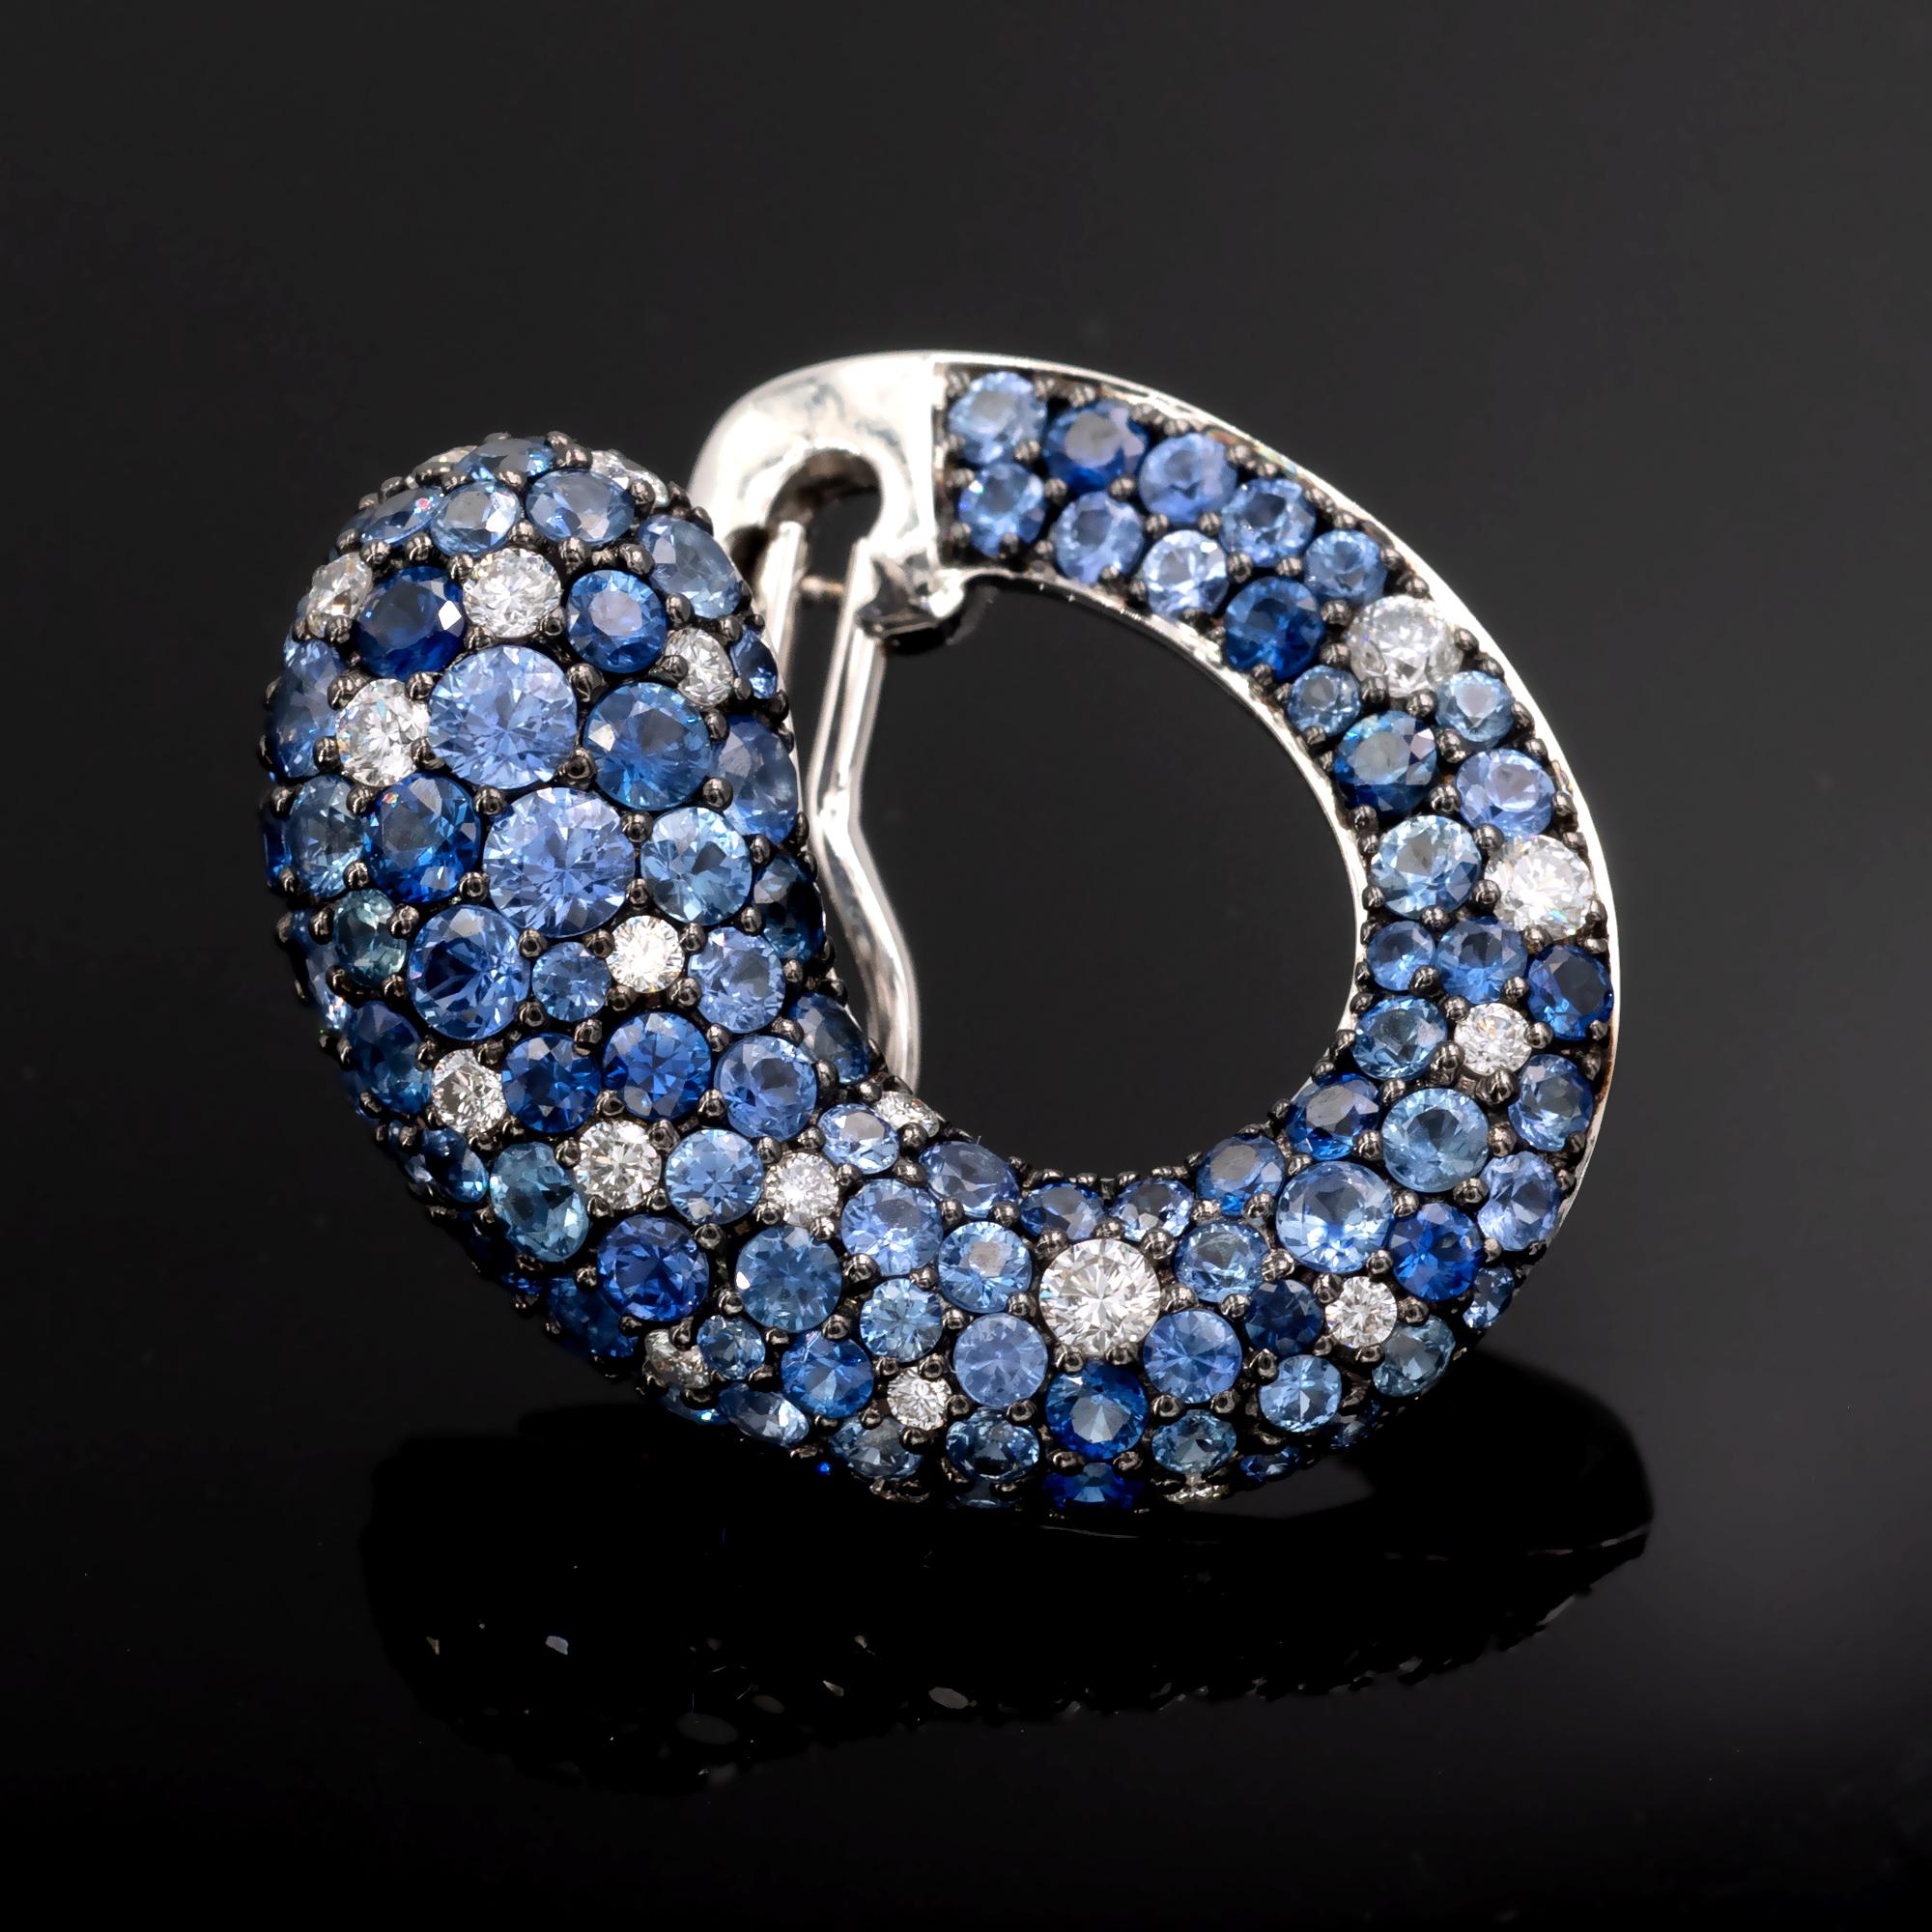 Lovely hoop shaped earrings earrings tightly tiled with sapphires and diamonds. The lively brilliant cut sapphires being of different shades of blue create a fascinating gradient highlighted with top quality diamonds savvily sprinkled over it.
The